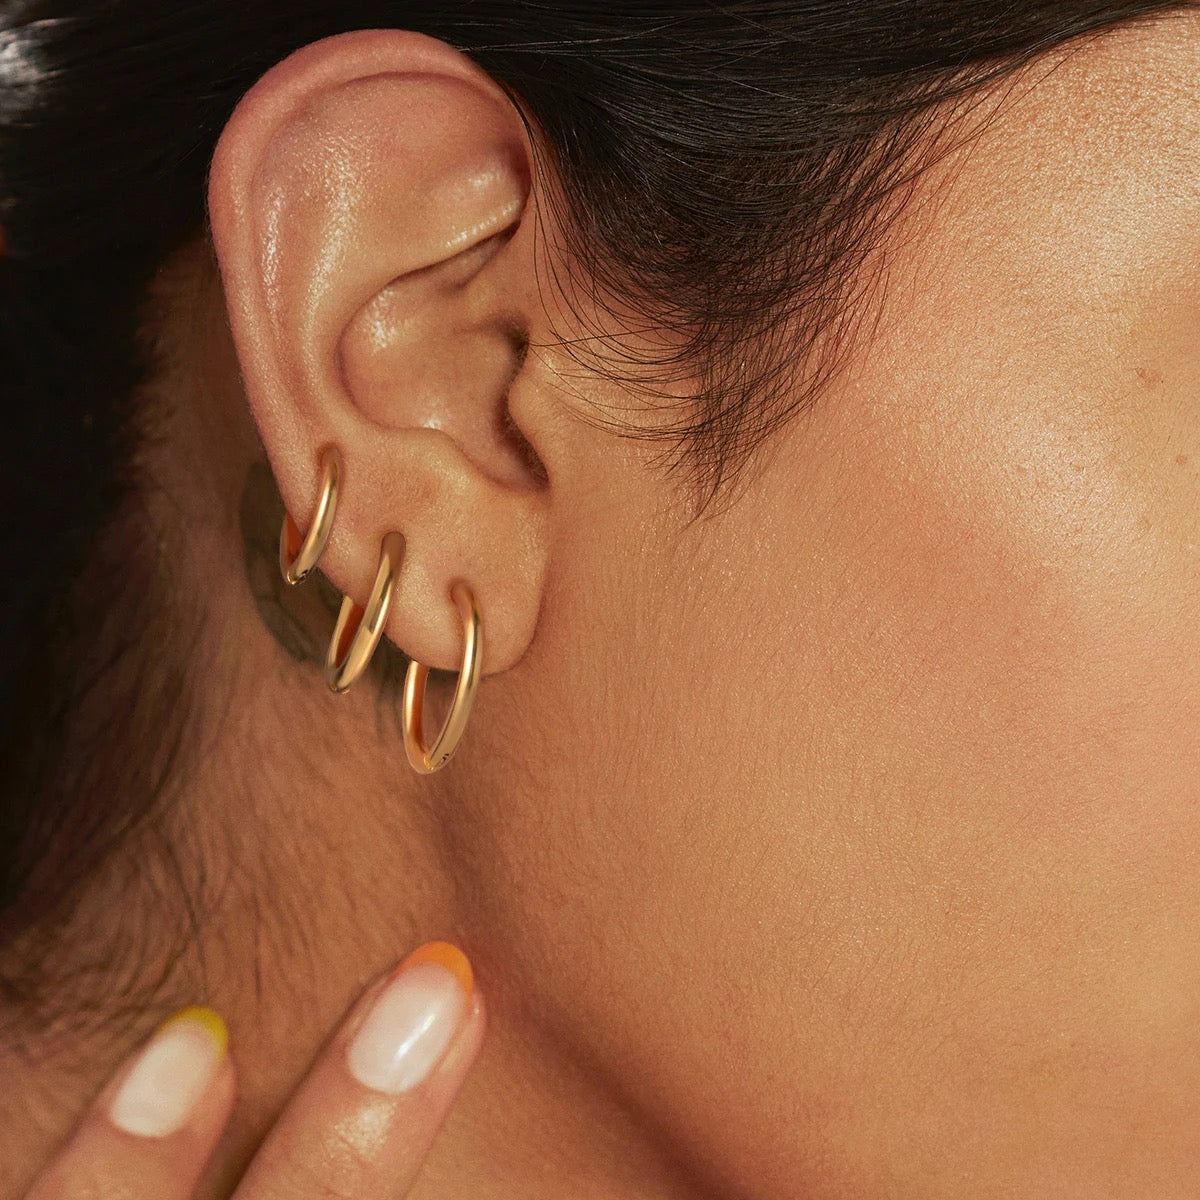 Set Of 18k Yellow Gold Hoop Earrings-Discover elegant 18k yellow gold hoop earrings, perfect for making style statements. Explore our collection for timeless designs that elevate your look! ✨-Dazzledvenus